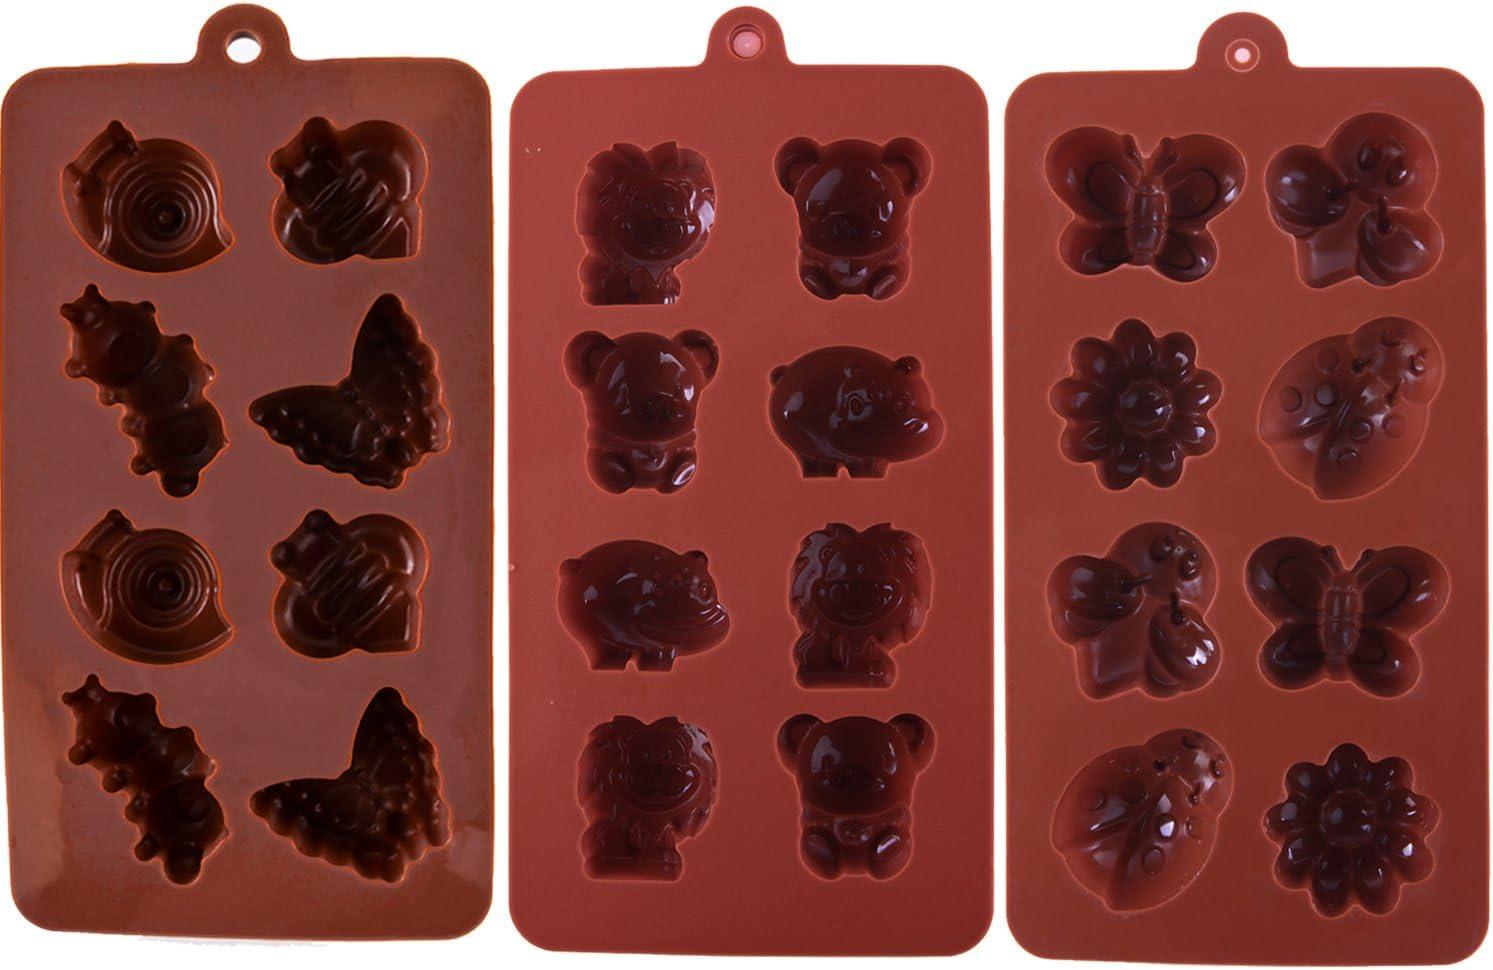 Christmas Silicone Chocolate Mould Xmas Candy Mold Trays Baking Mould Santa  Clause Snowman Present Gingerbread Candy Cane Mould